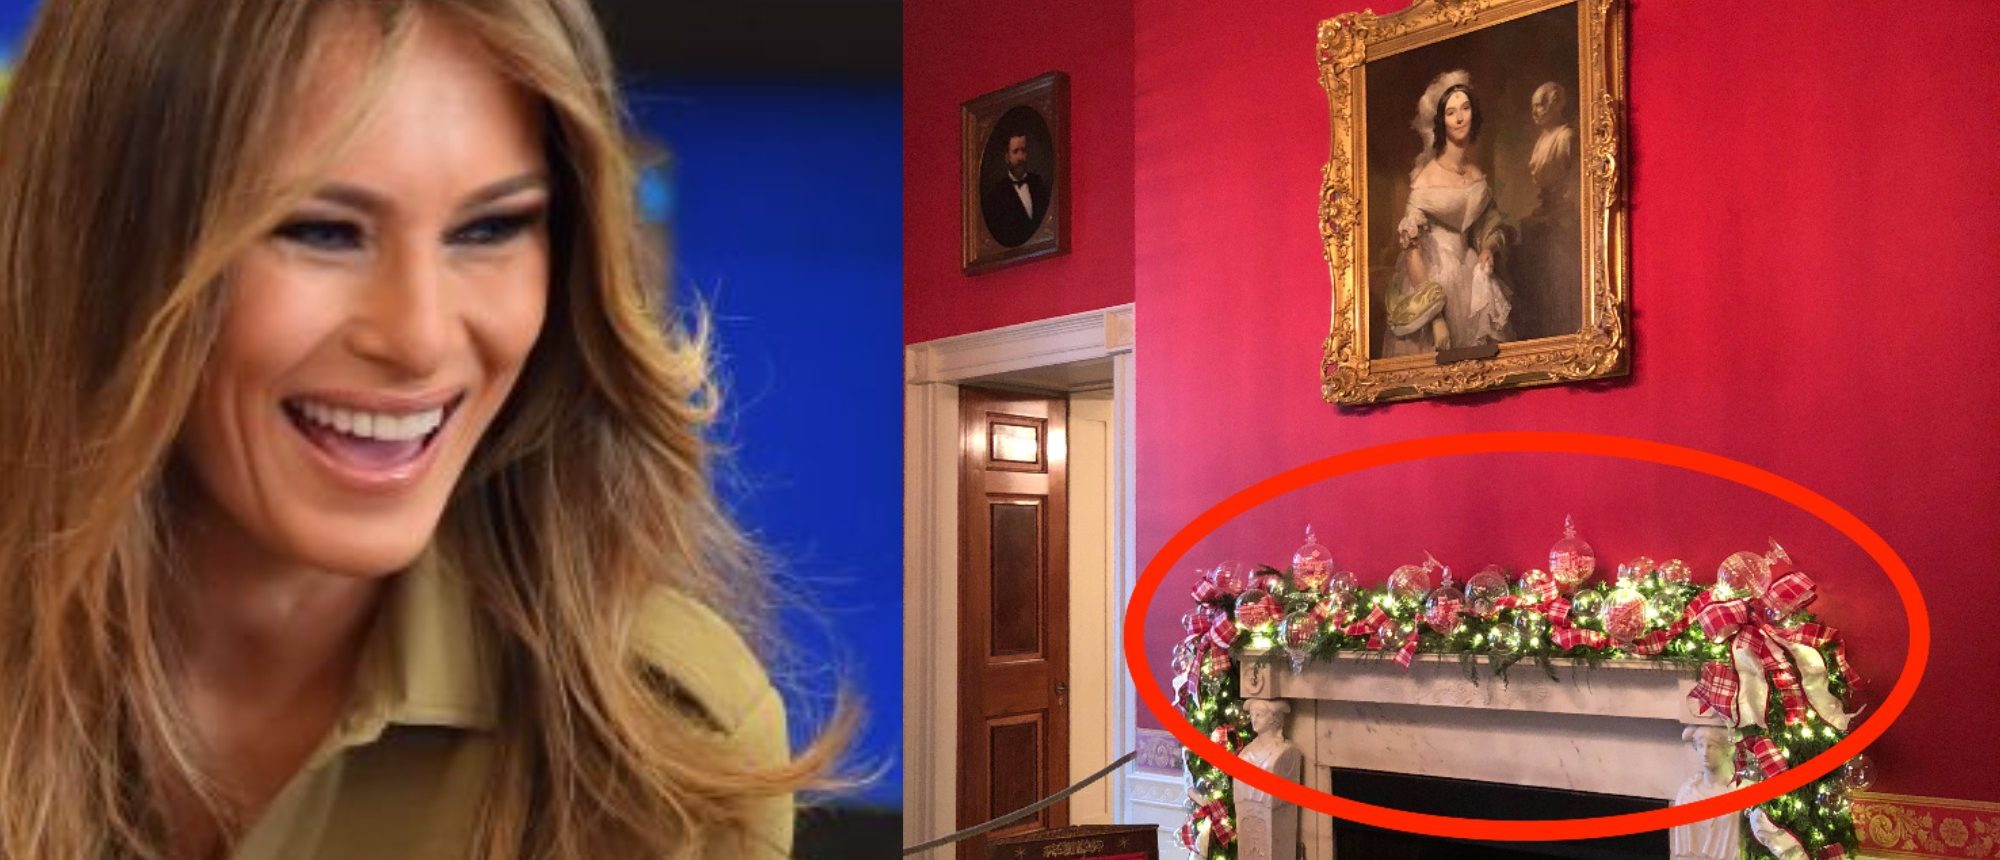 Melania Trump Hid A Secret Troll To Michelle Obama In Her White House Decorations ...